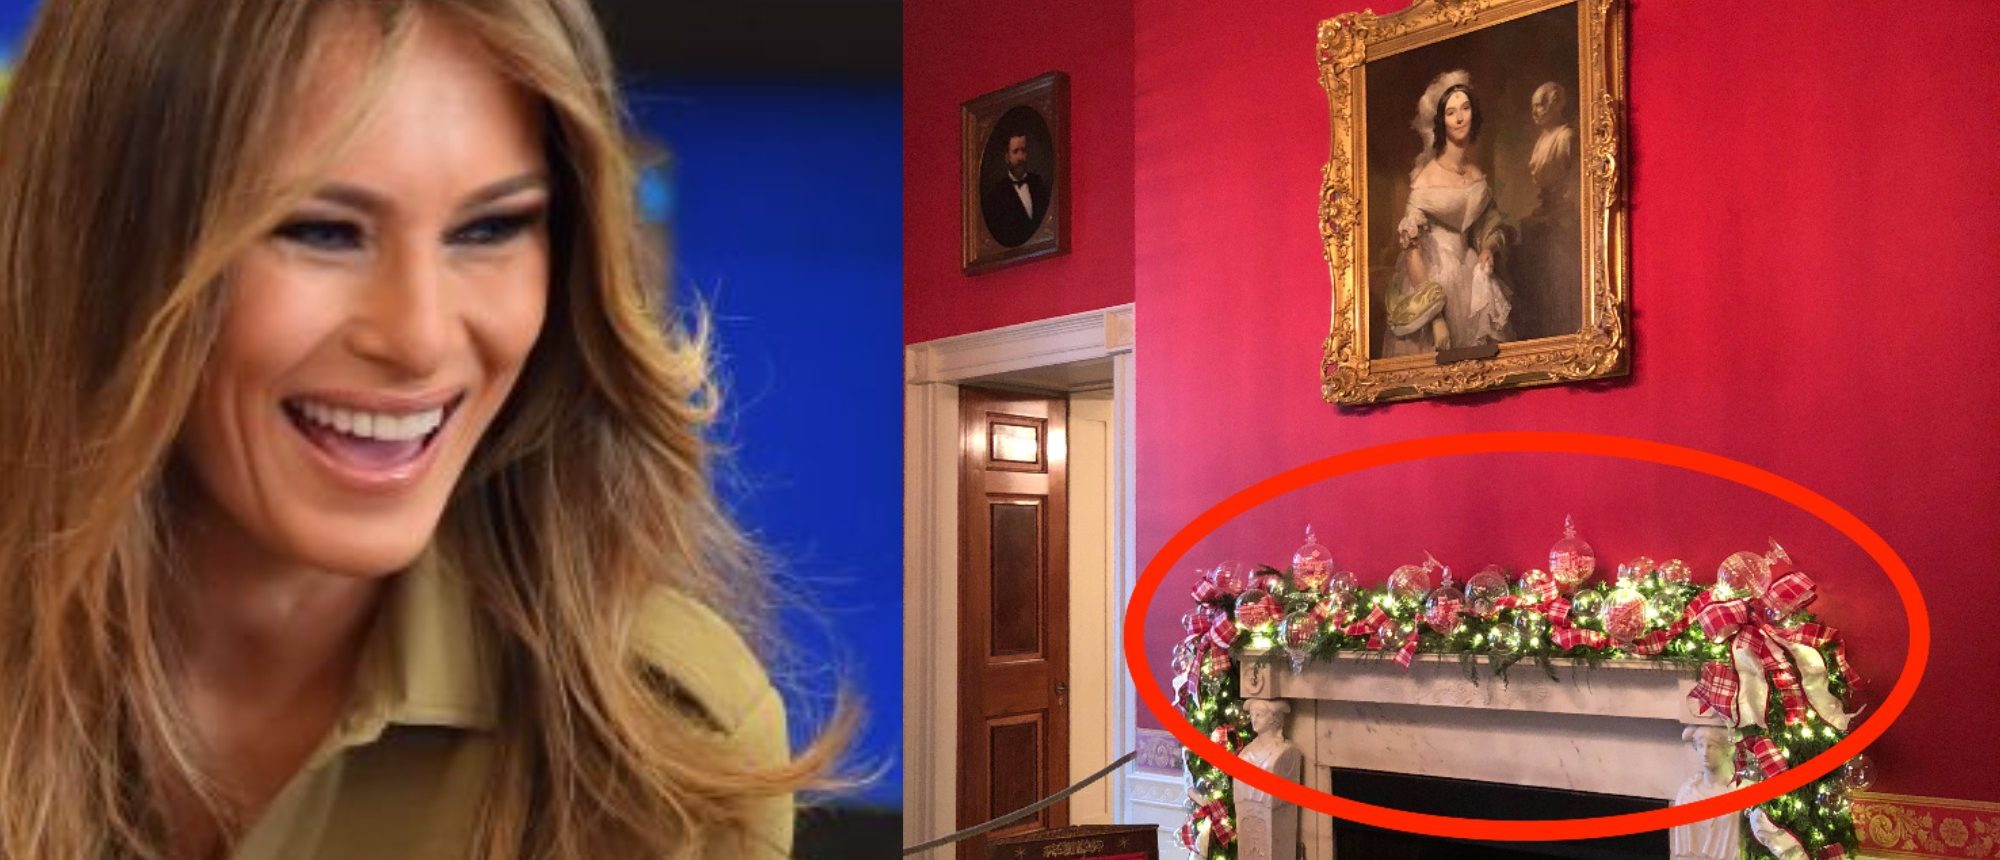 Melania Trump Hid A Secret Troll To Michelle Obama In Her White House Decorations ...